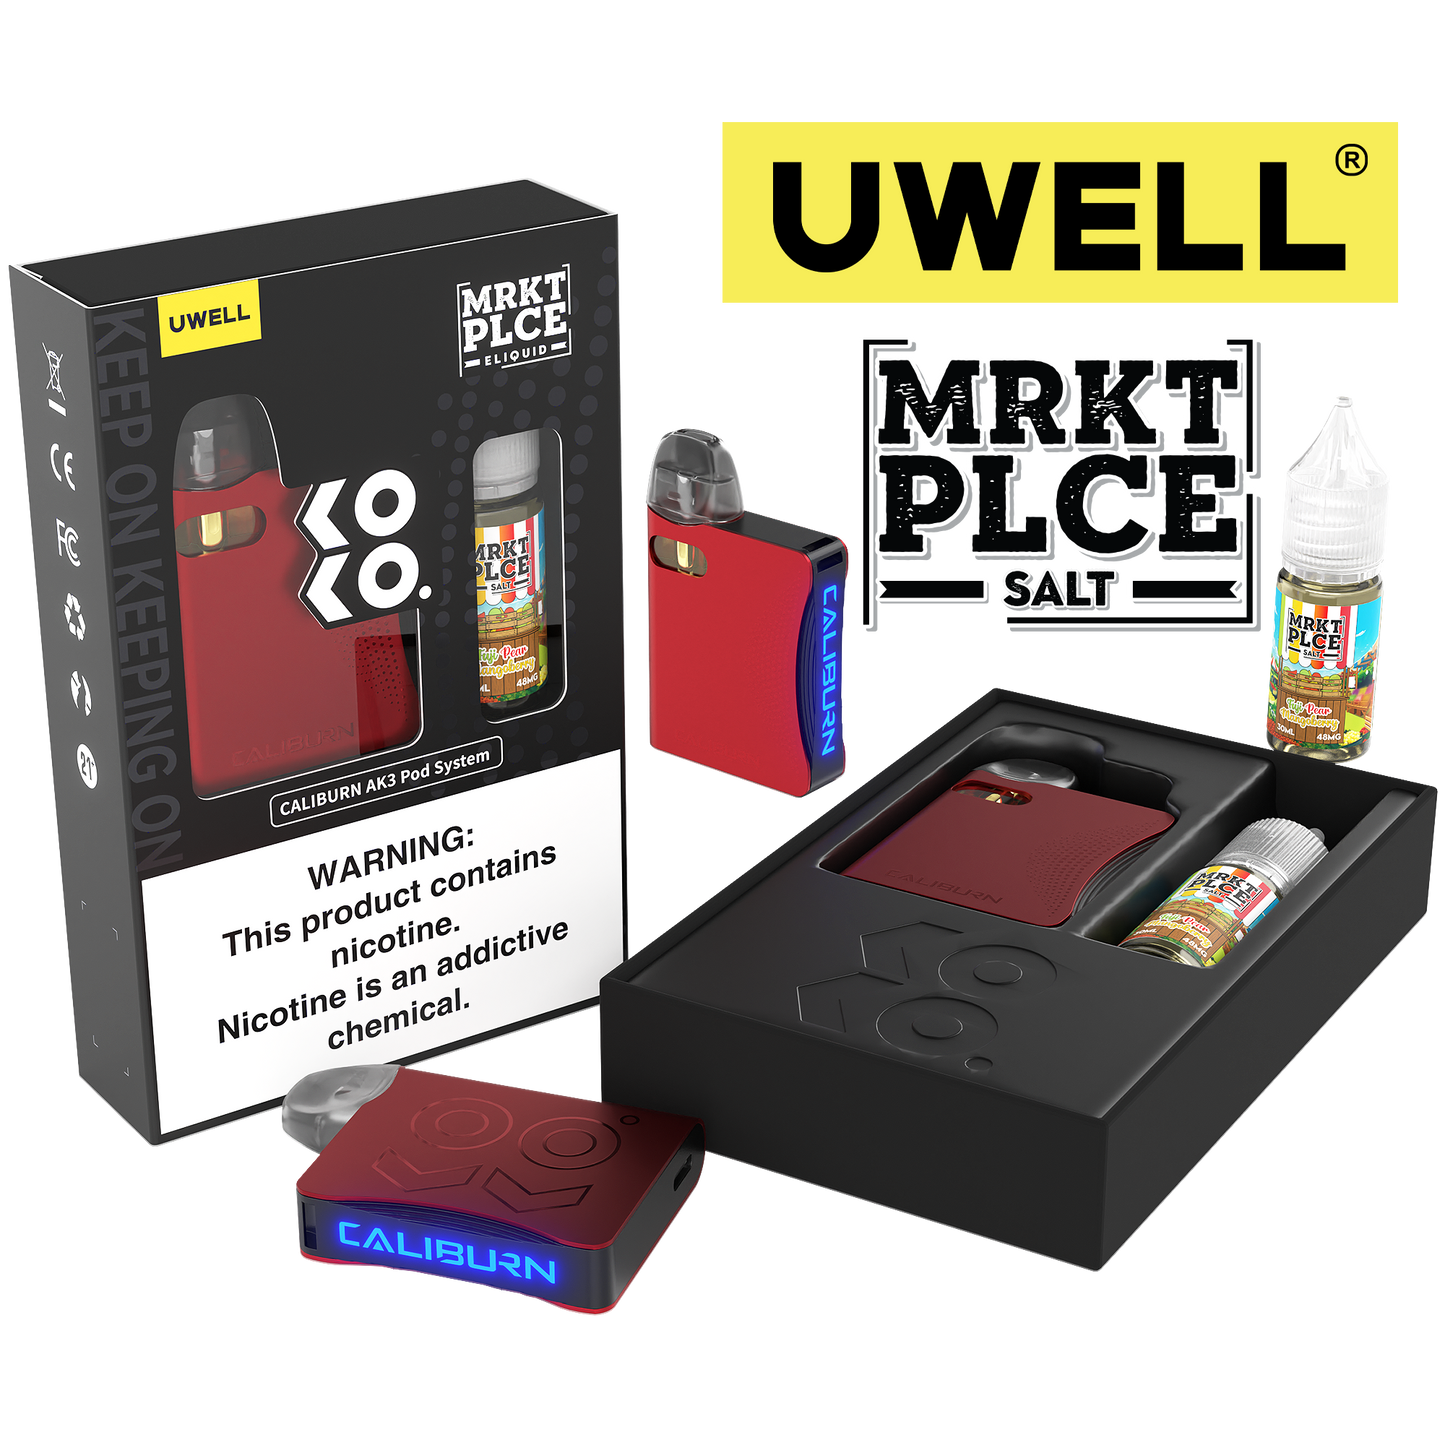 Uwell Caliburn AK3 Kit + A3S 0.8ohm Pods (x2) + Daddy's Vapor 10mL Salts 50mg Red Flavor: Fuji Pear Mangoberry Packaging